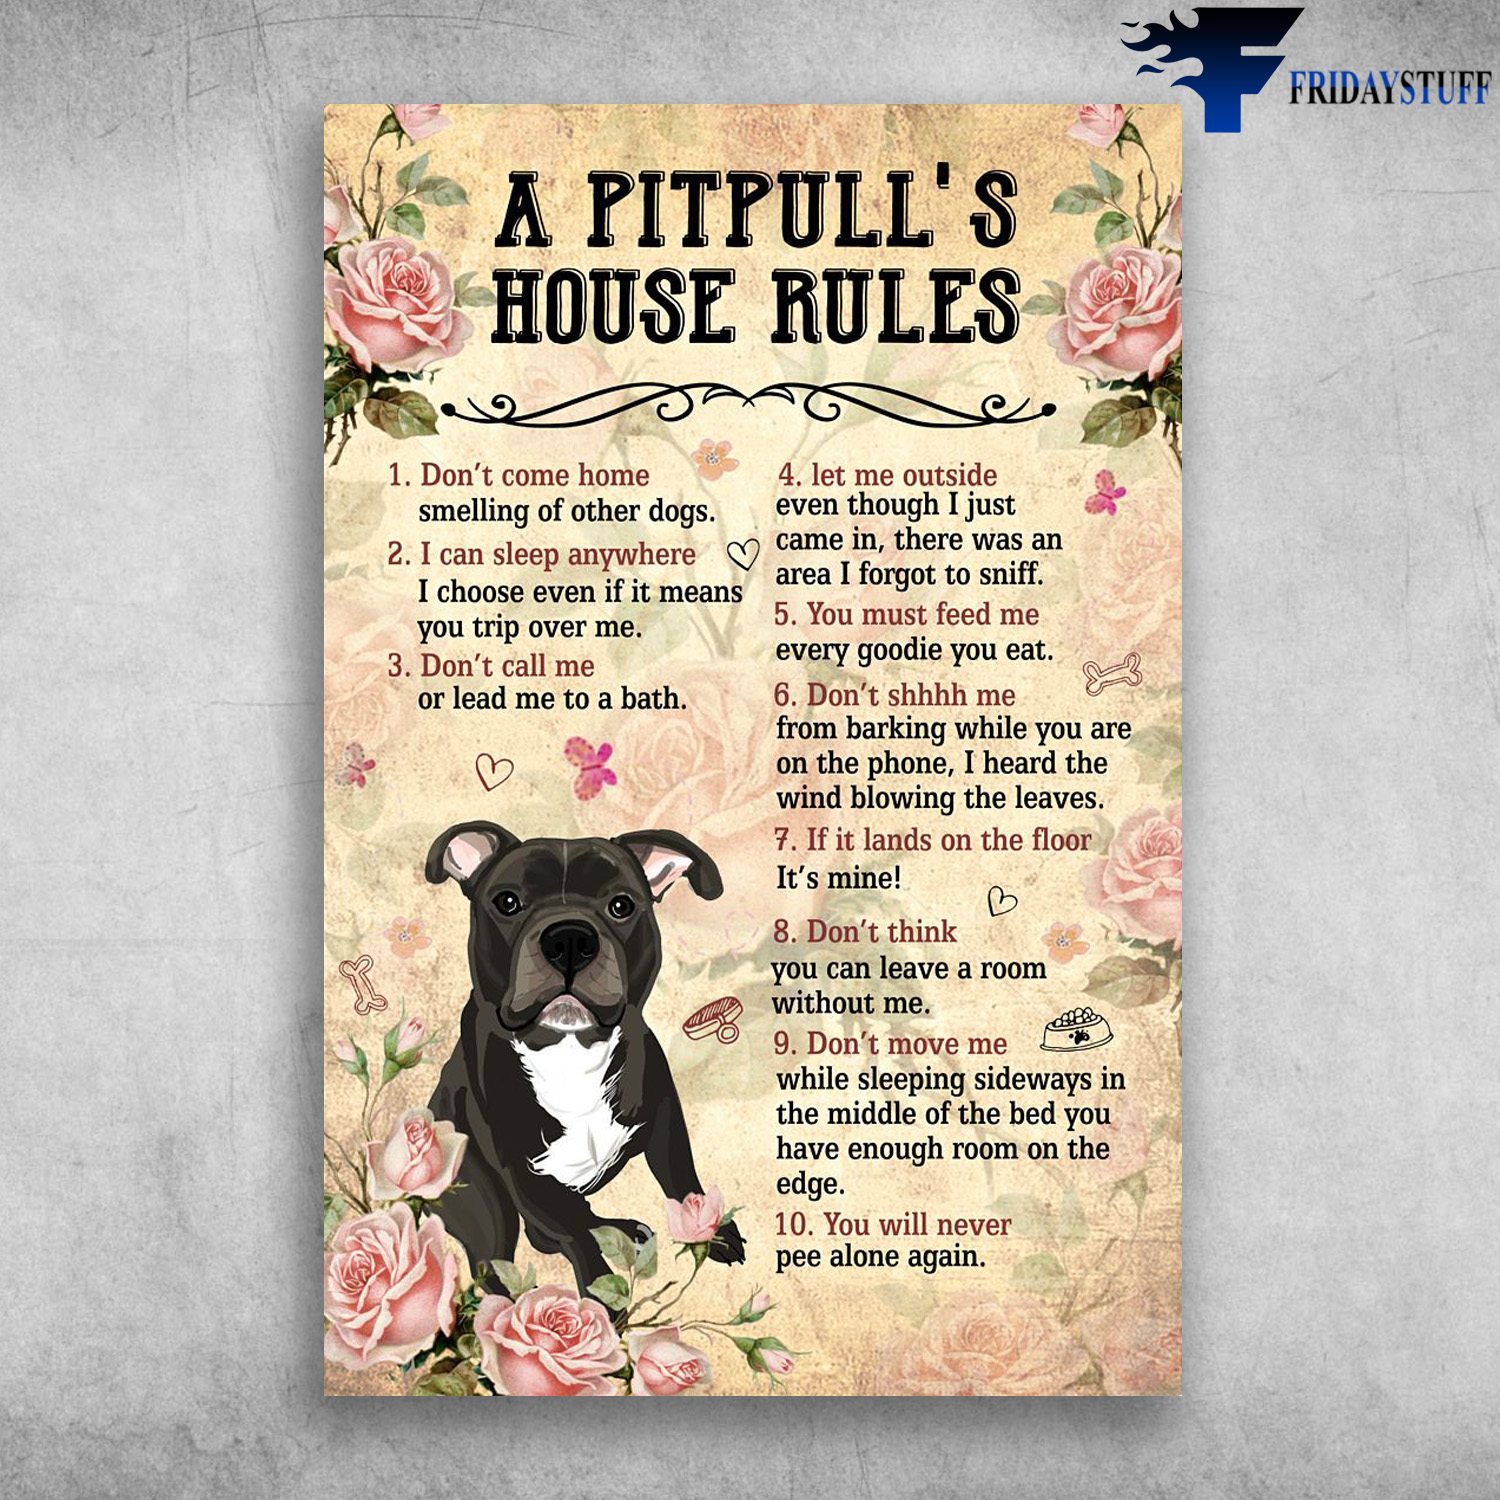 A Pitpull's House Rules - Don't Come Home, I Can Sleep Anywhere, Don't Call Me, Let Me Outside, You Must Feed Me, Don't Shhhh Me, If It Lands On The Floor, Don't Think, Don't Move Me, You Will Never Pee Alone Again